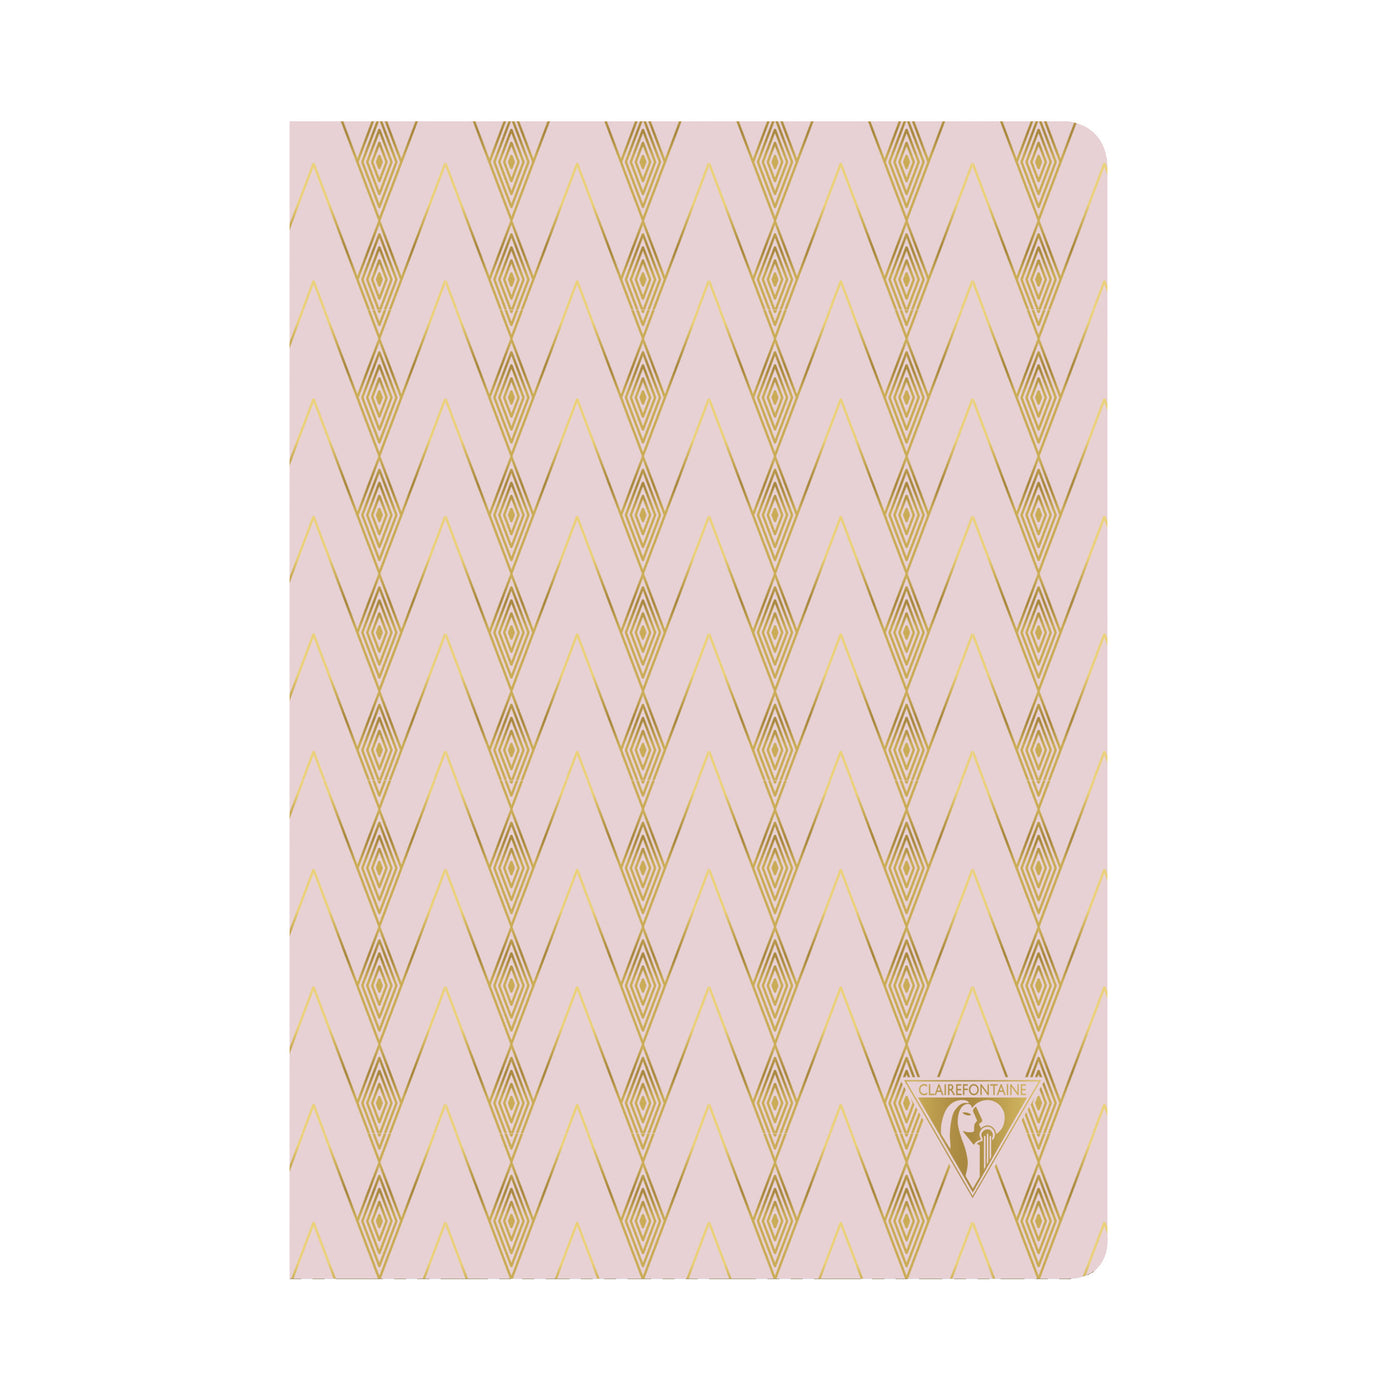 Clairefontaine Neo Deco Sewn Spine Notebook - Ivory Paper - Lined 48 Sheets - 6 x 8 1/4 - Powder Pink | Atlas Stationers.